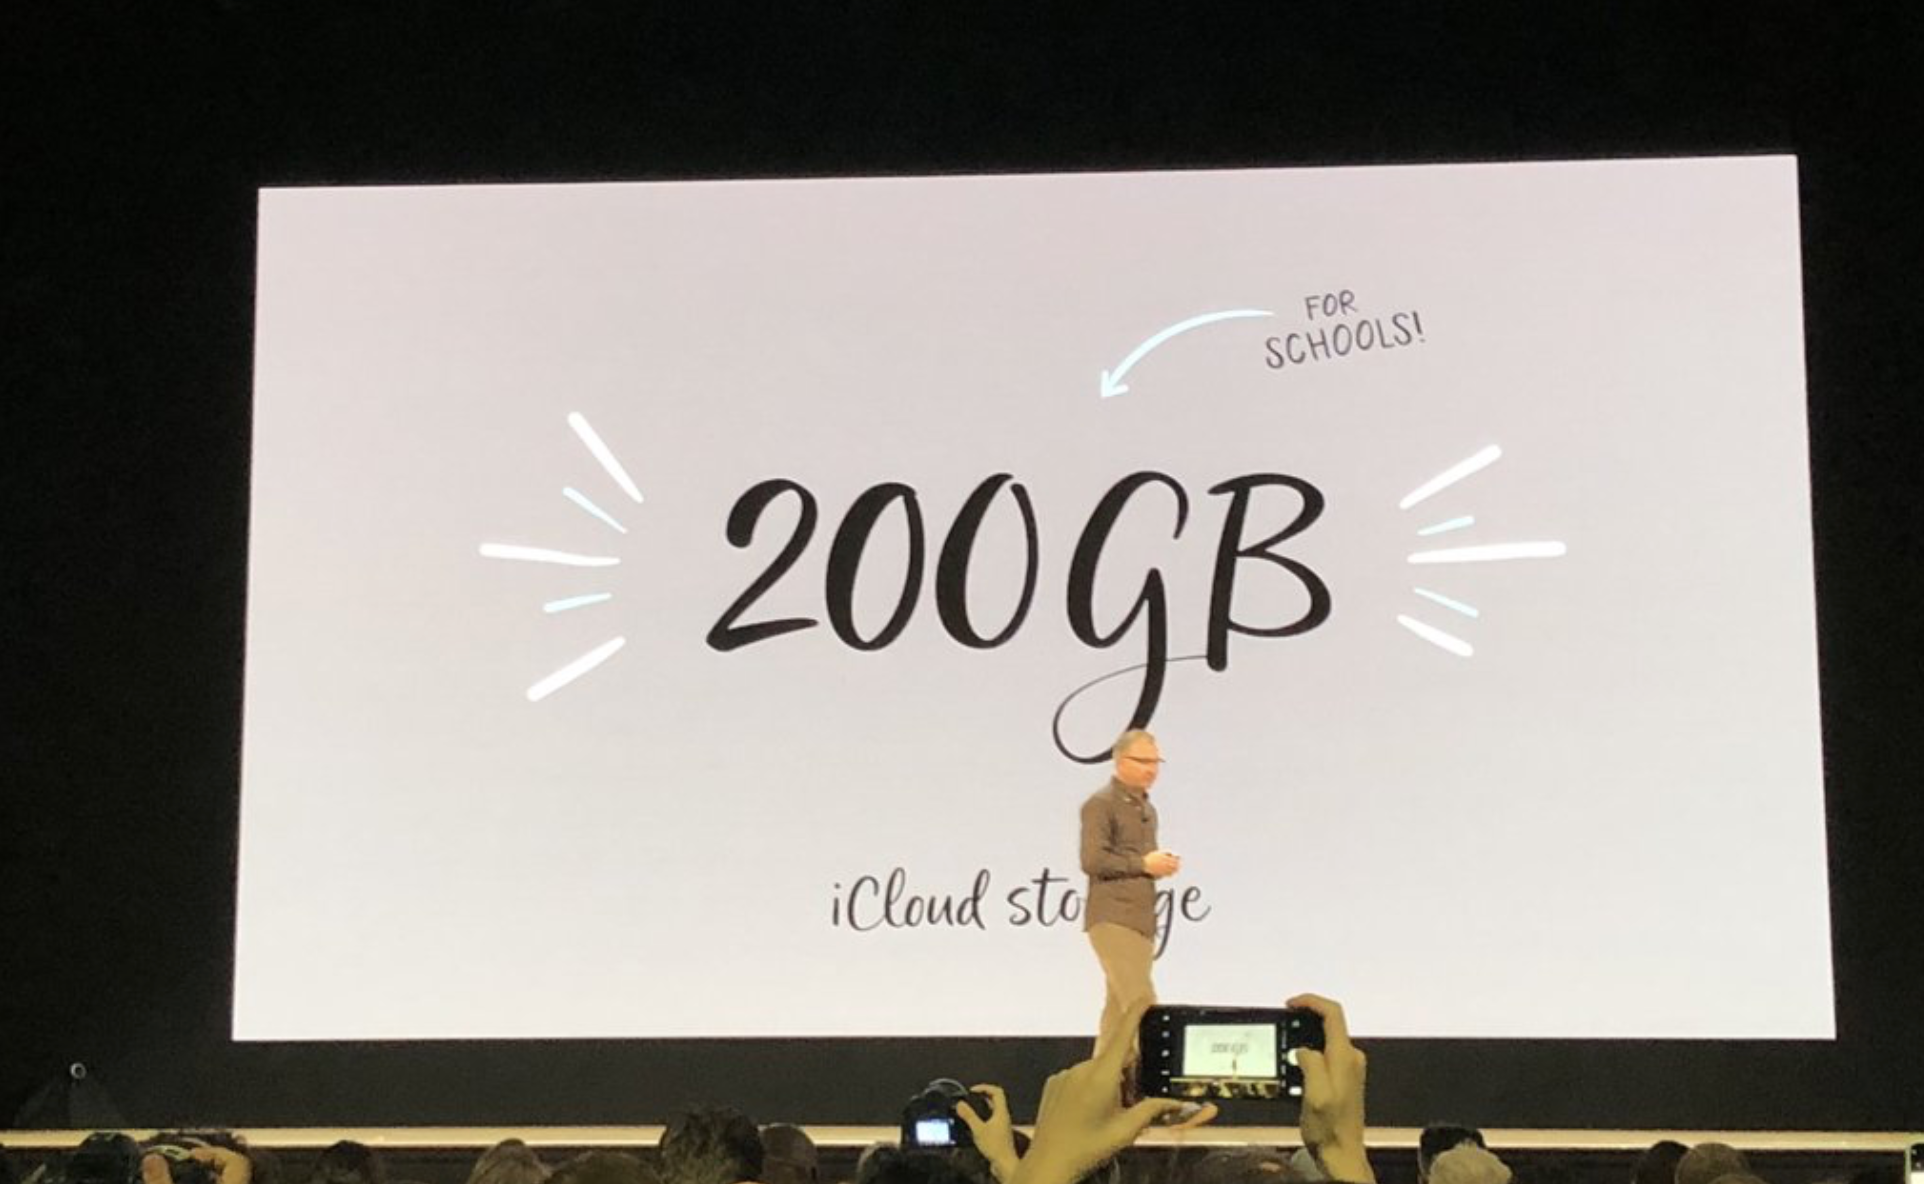 Apple Announces Students to Get 200GB of iCloud Storage for Free